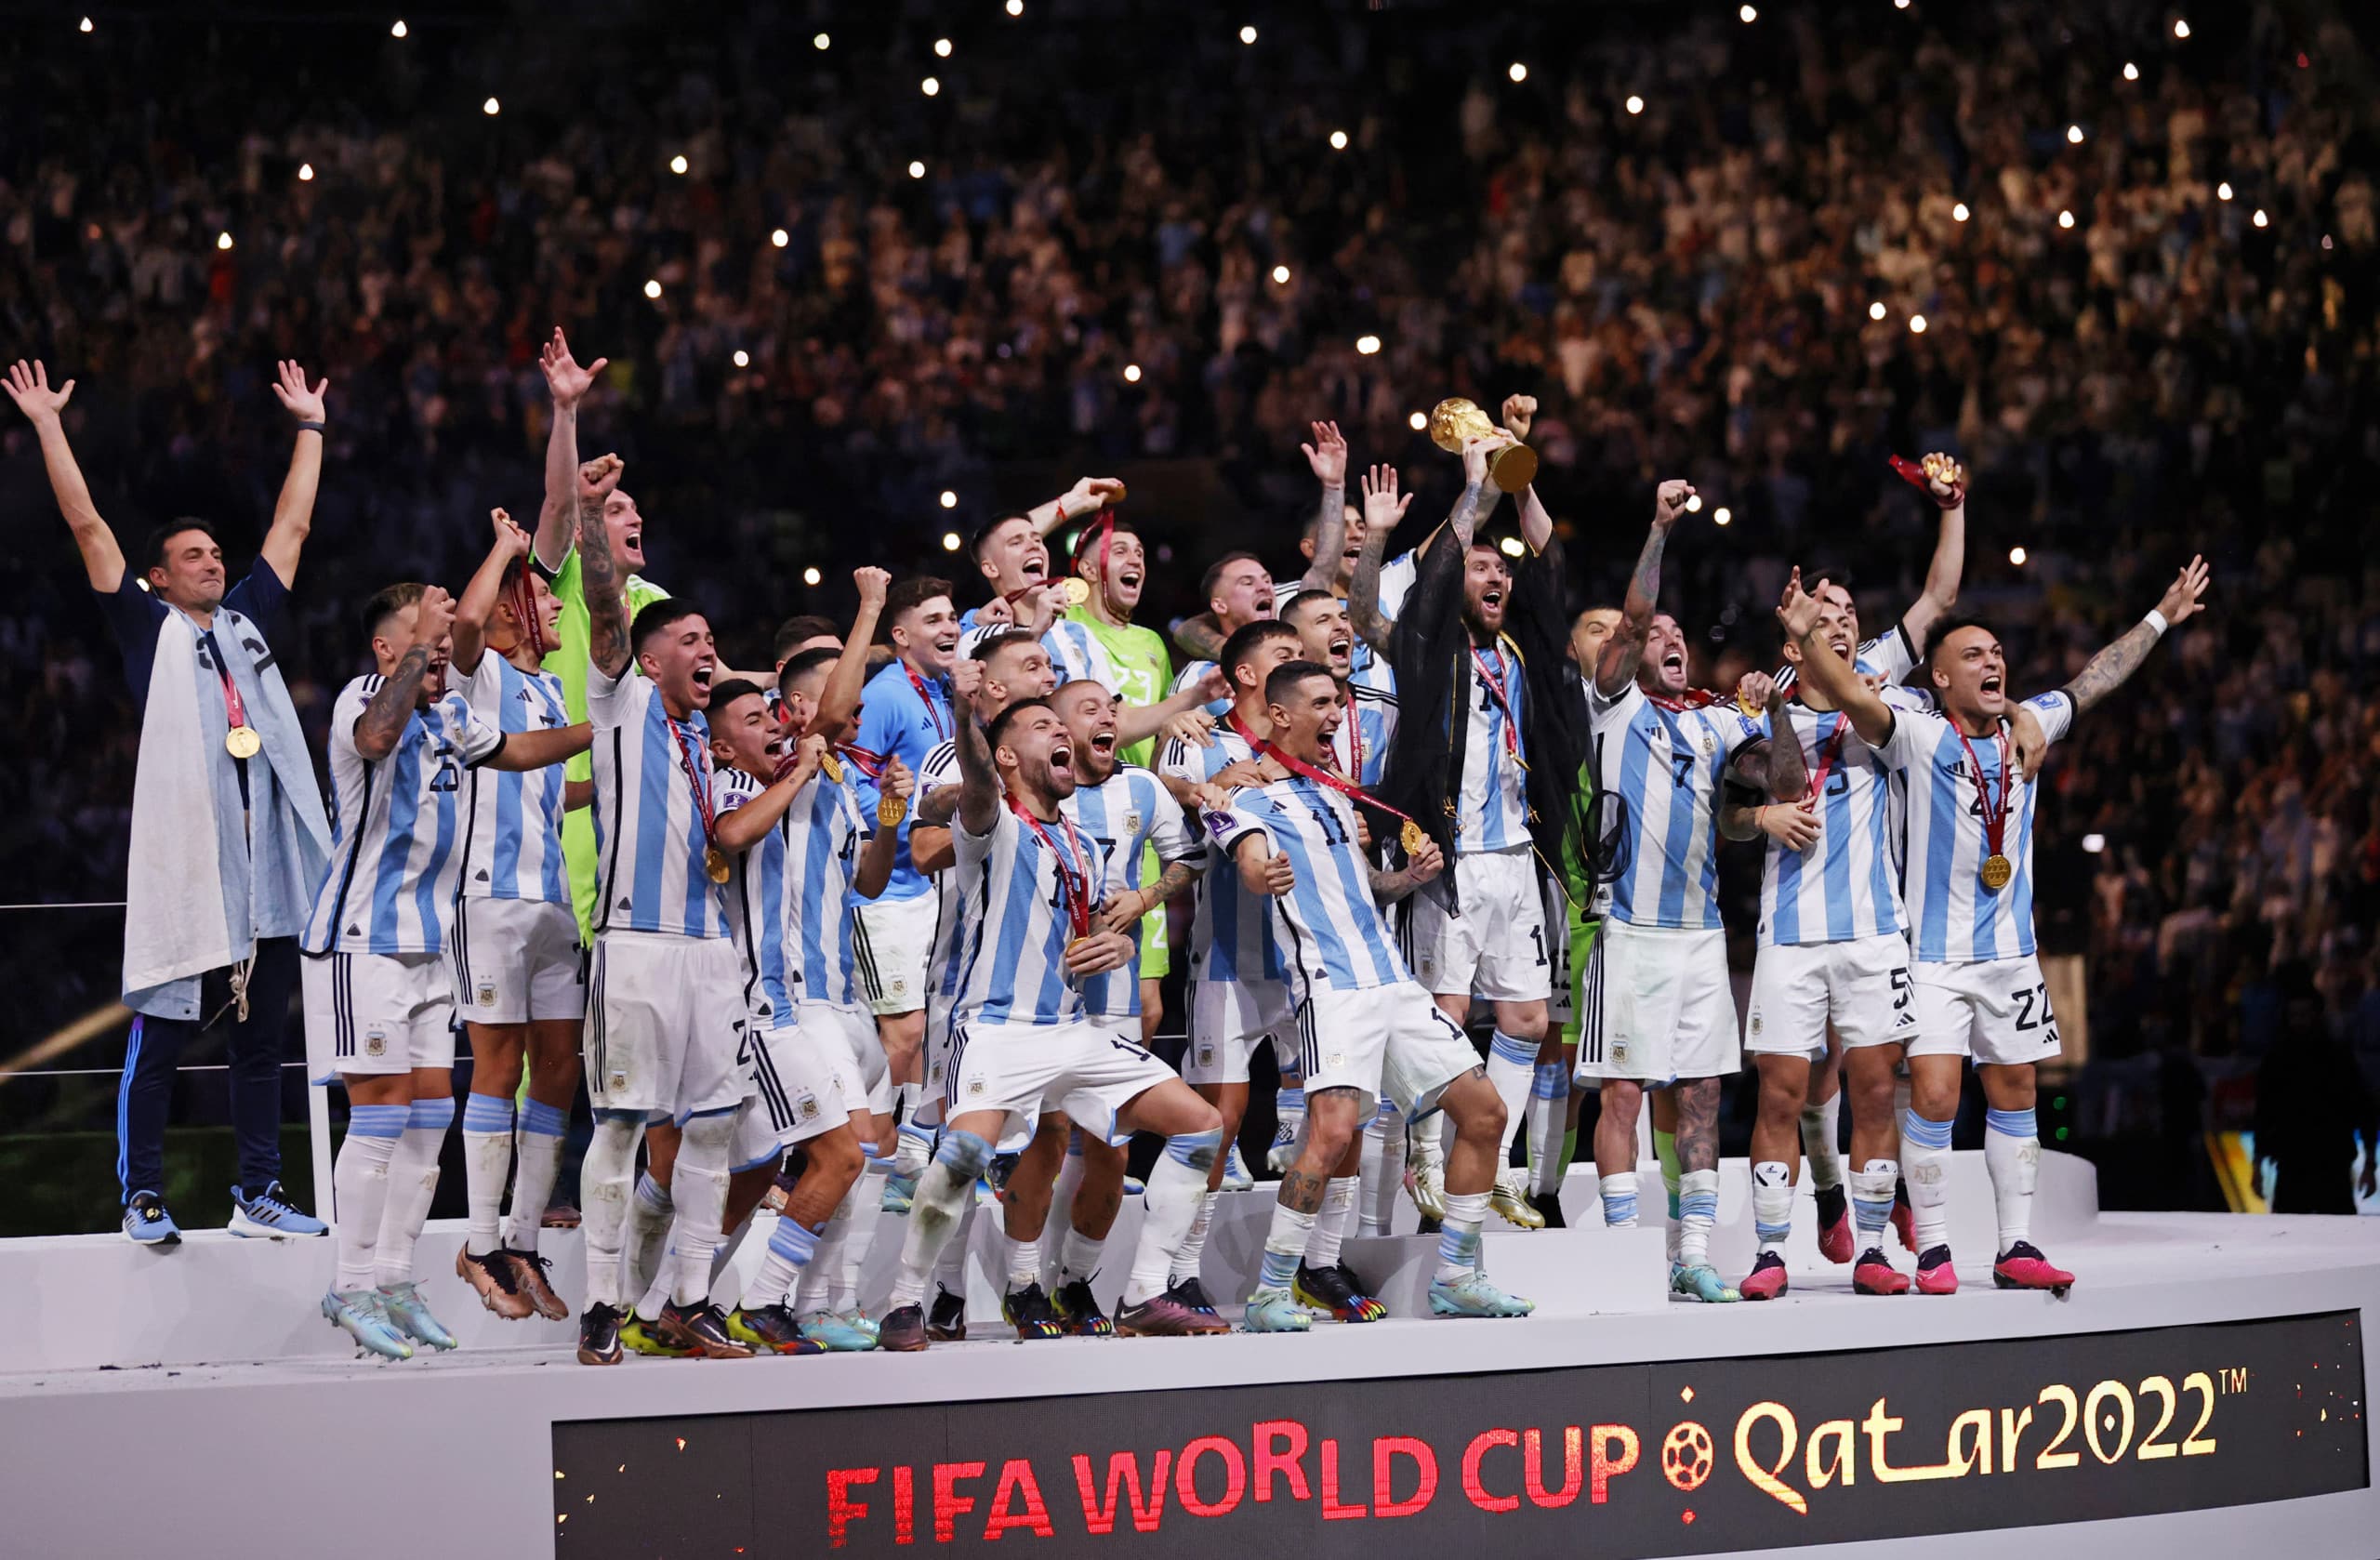 Argentina Wins 2022 World Cup, Capping Historic Tournament